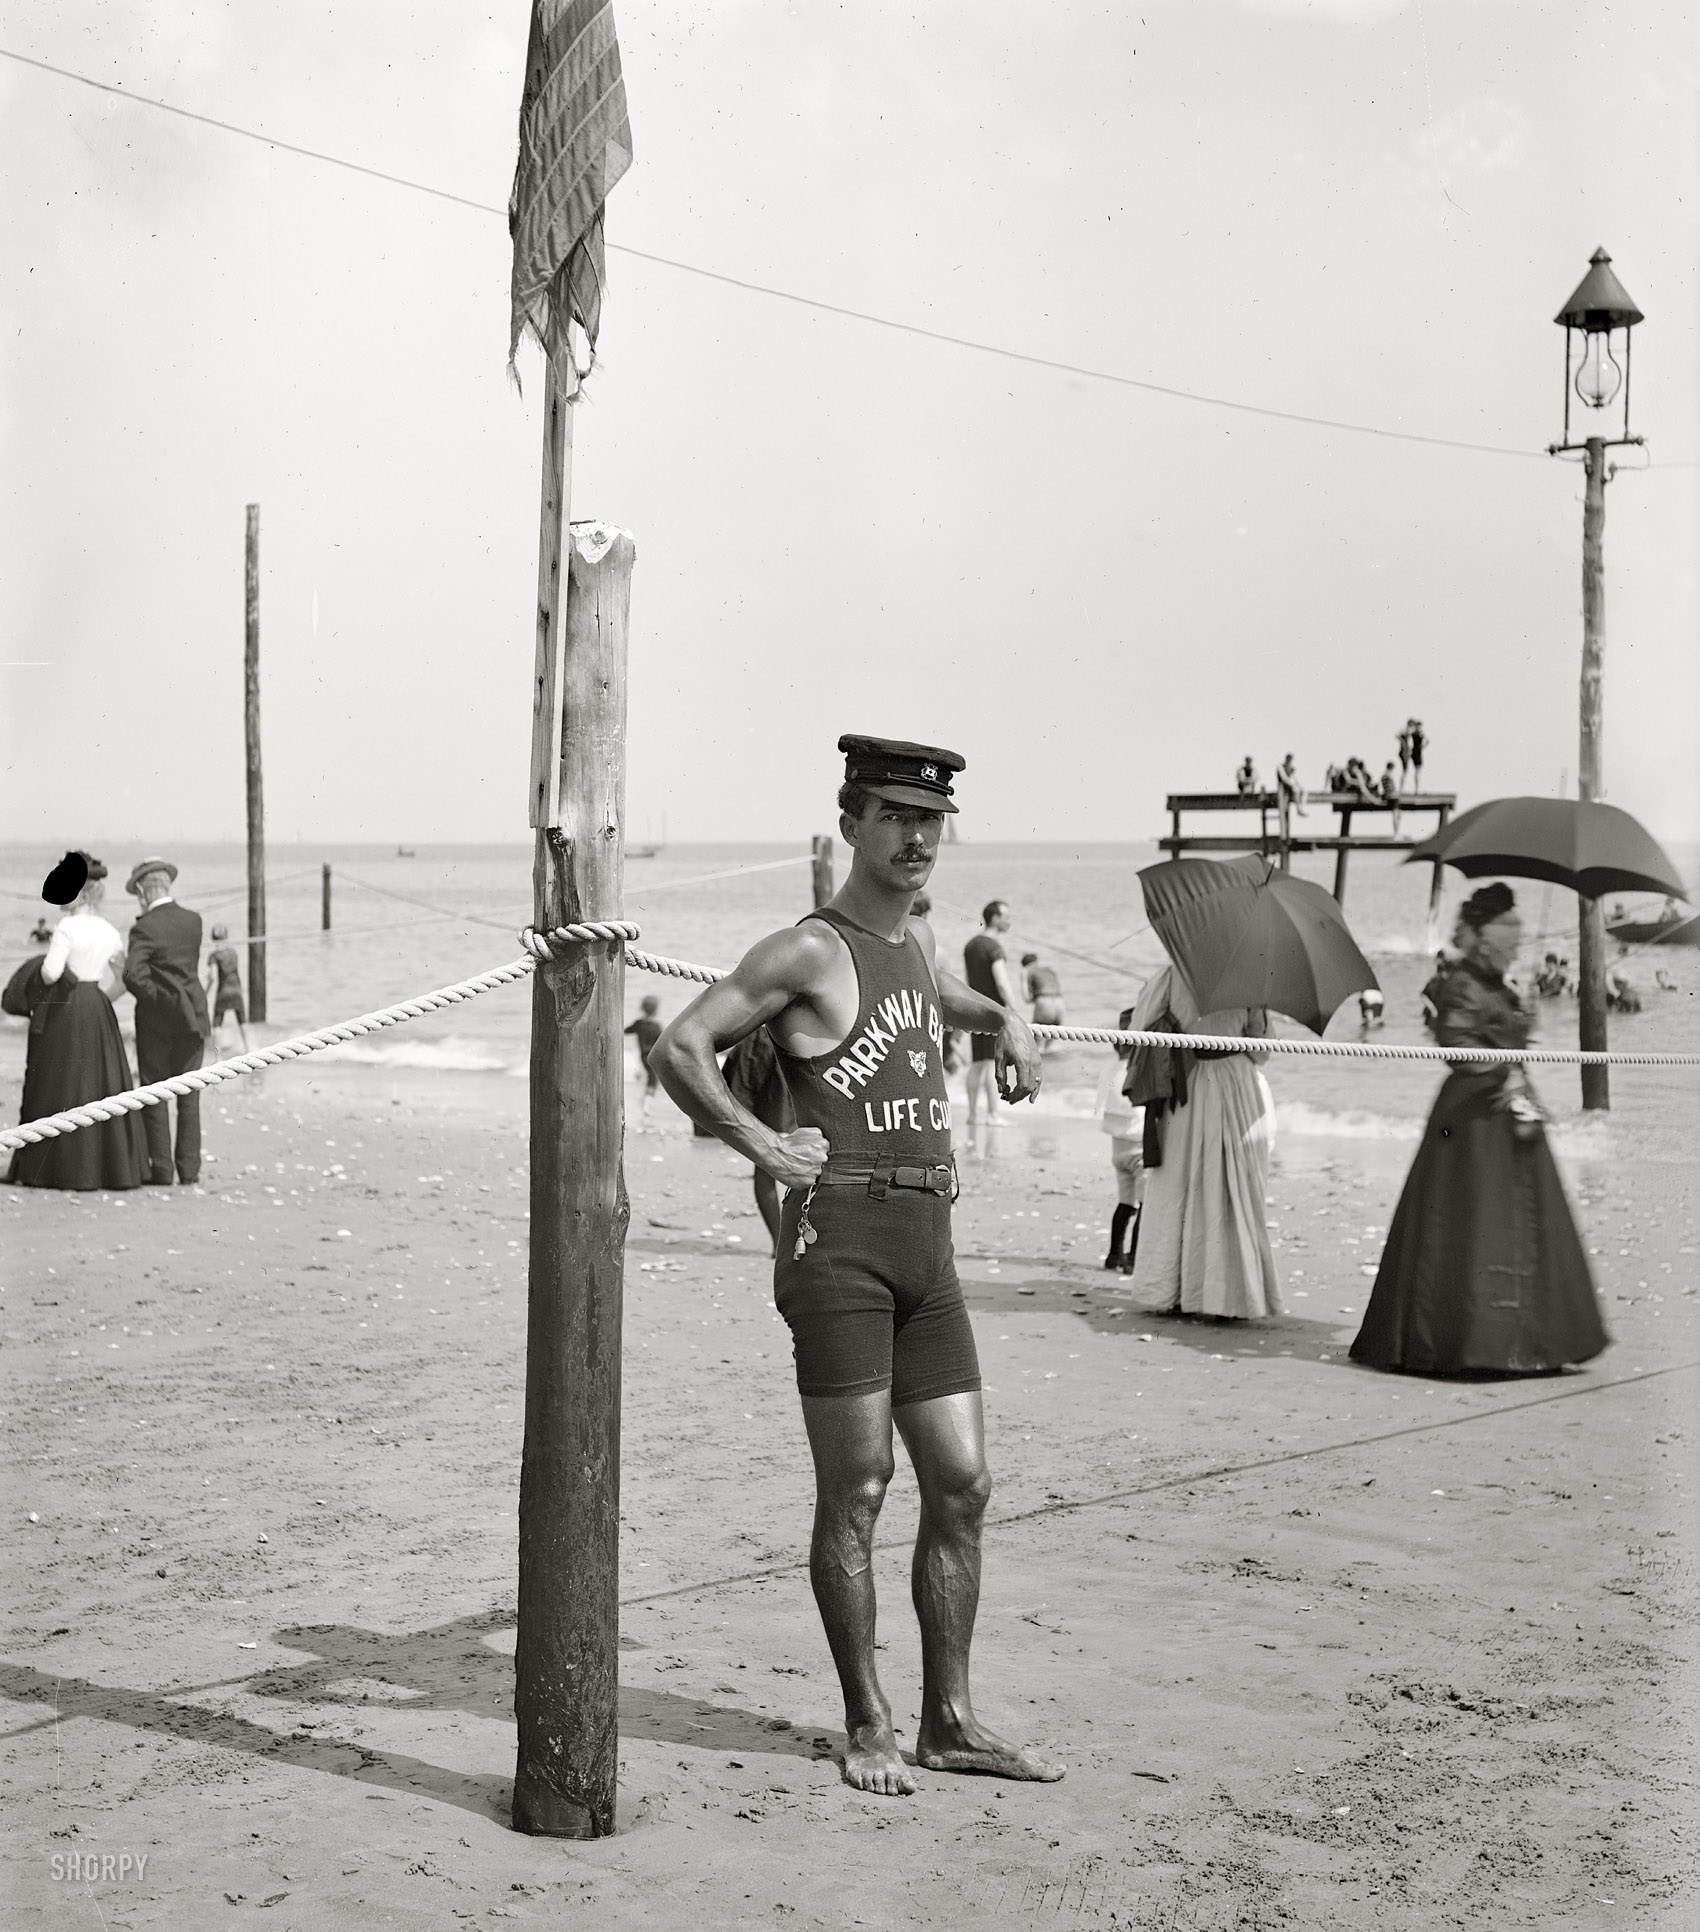 Circa 1905. "A life guard. Brighton Beach, New York." He looks like someone who knows the ropes. Detroit Publishing Company glass negative. View full size.